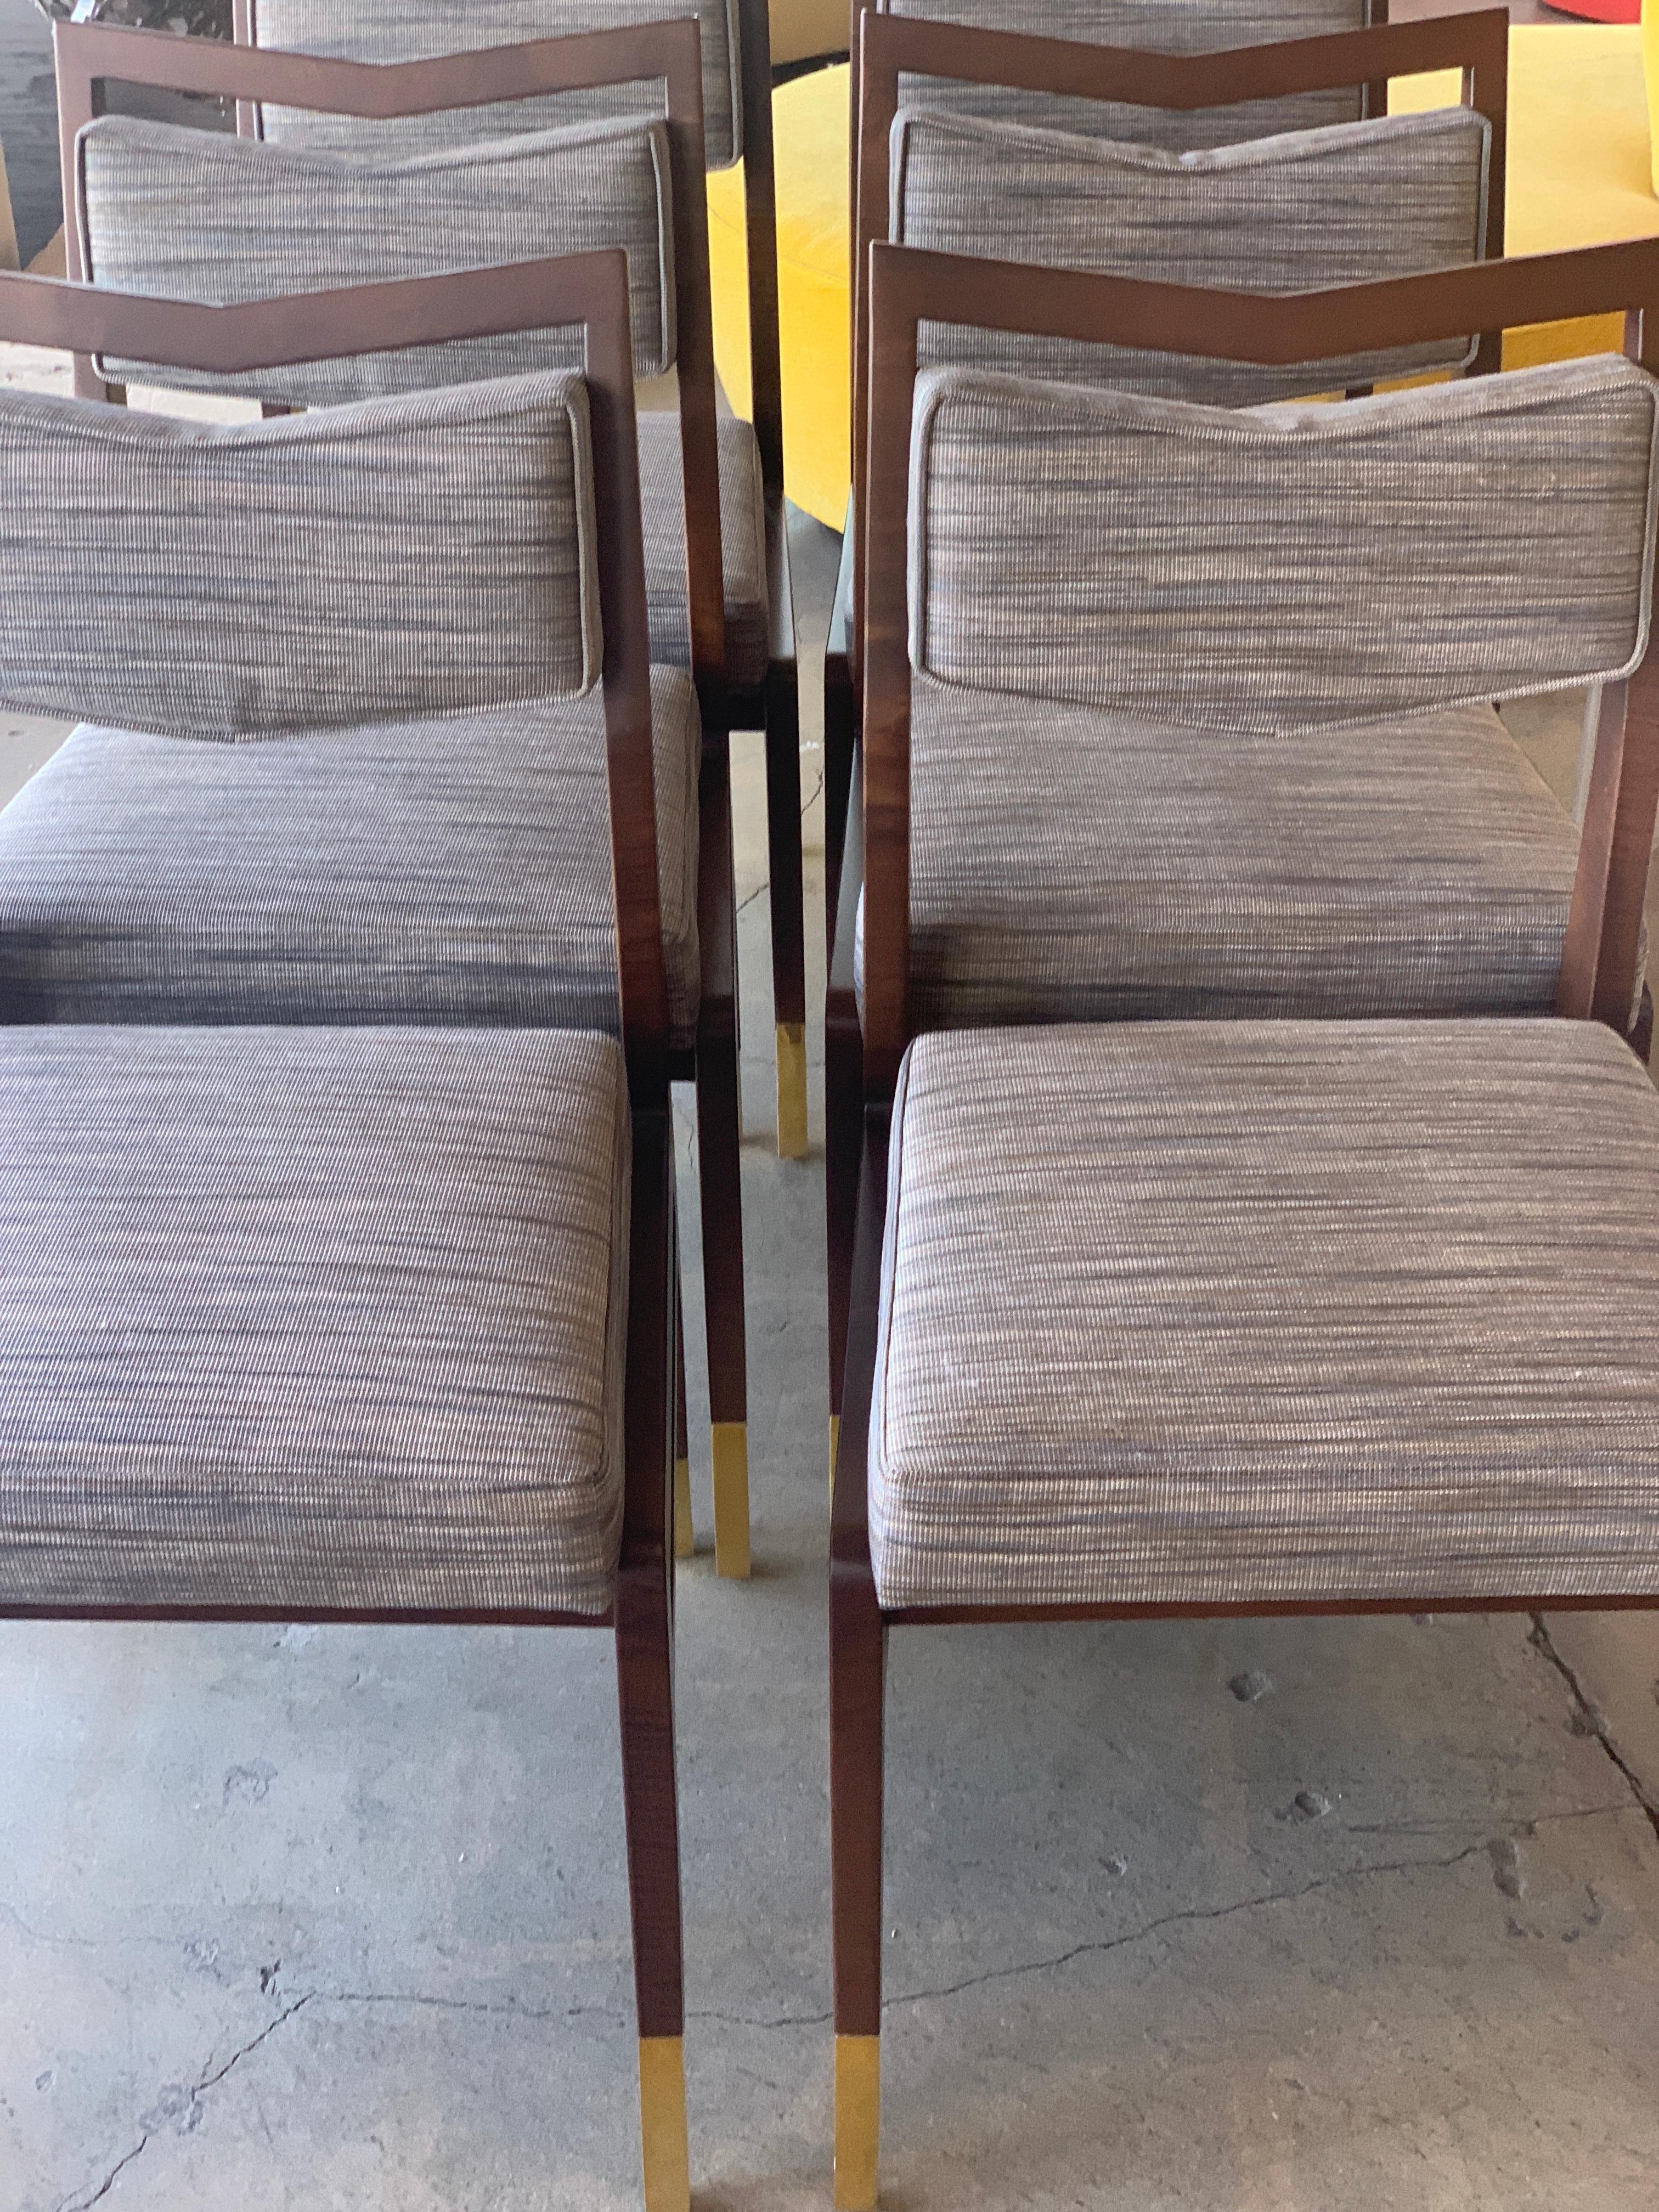 A set of 6 custom made chairs ordered from Van den Akker and called the Bruno chair. These are less than 2 years old and were rarely used. In good condition with some minor nicks and abrasions.